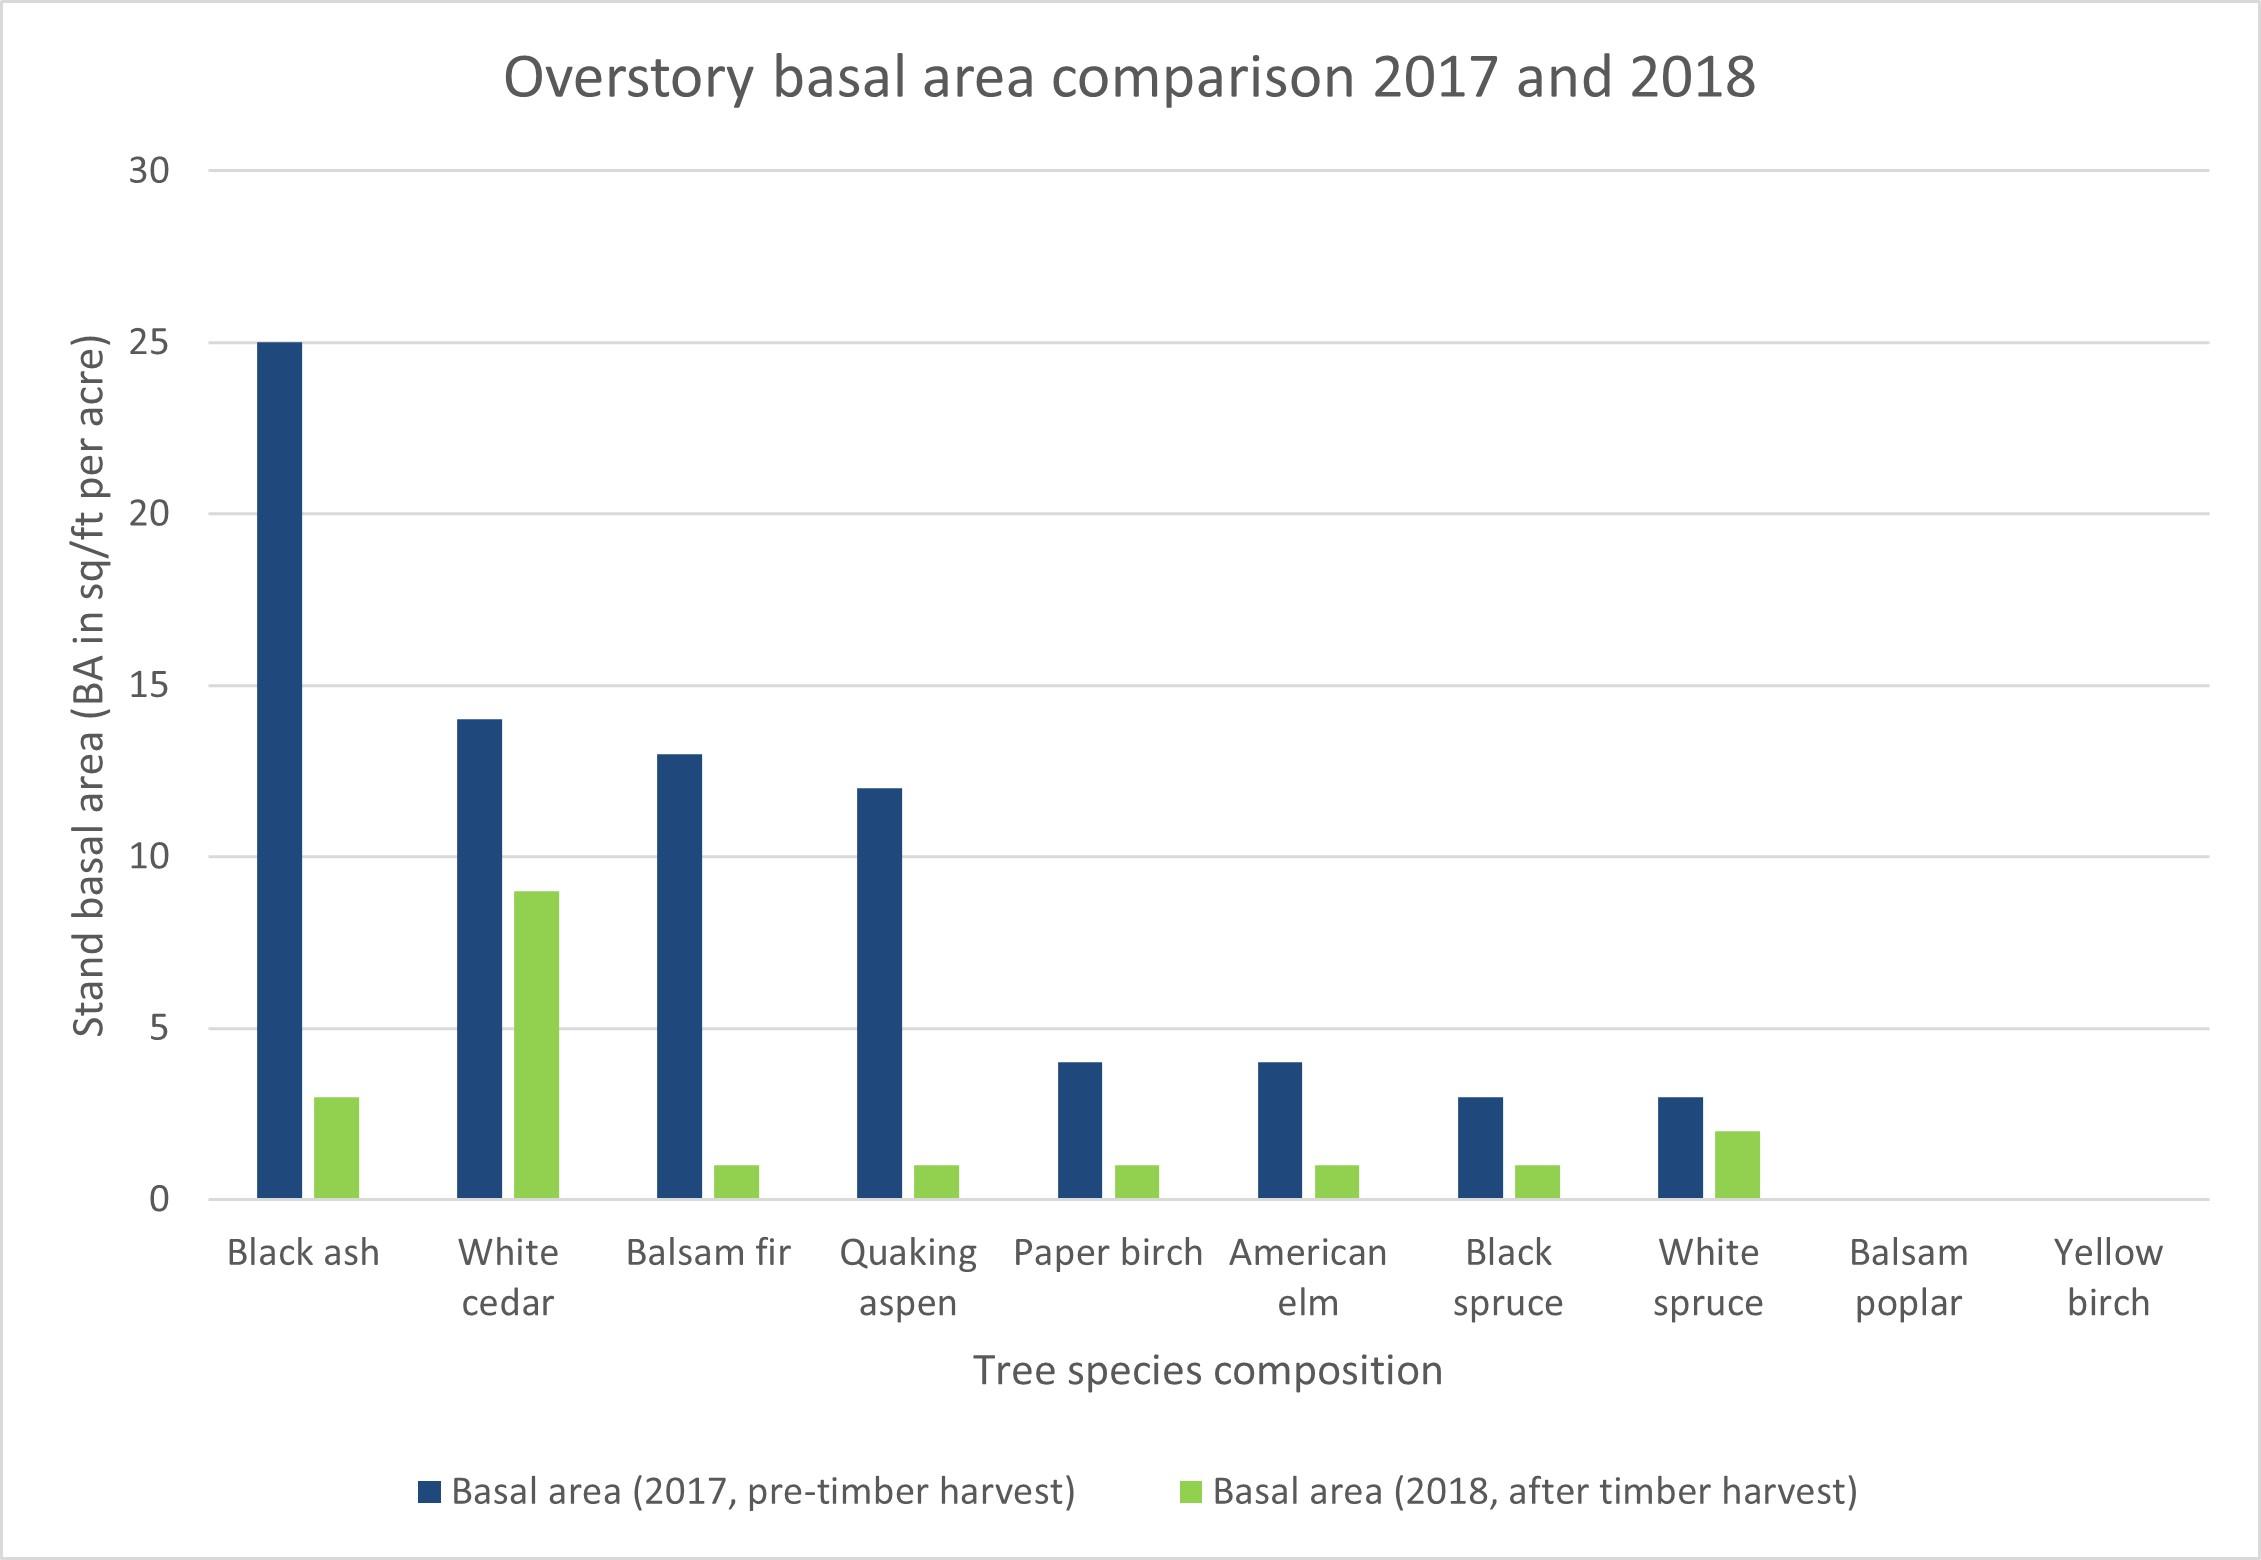 Oerstory basal area comparison in 2017 and 2018.